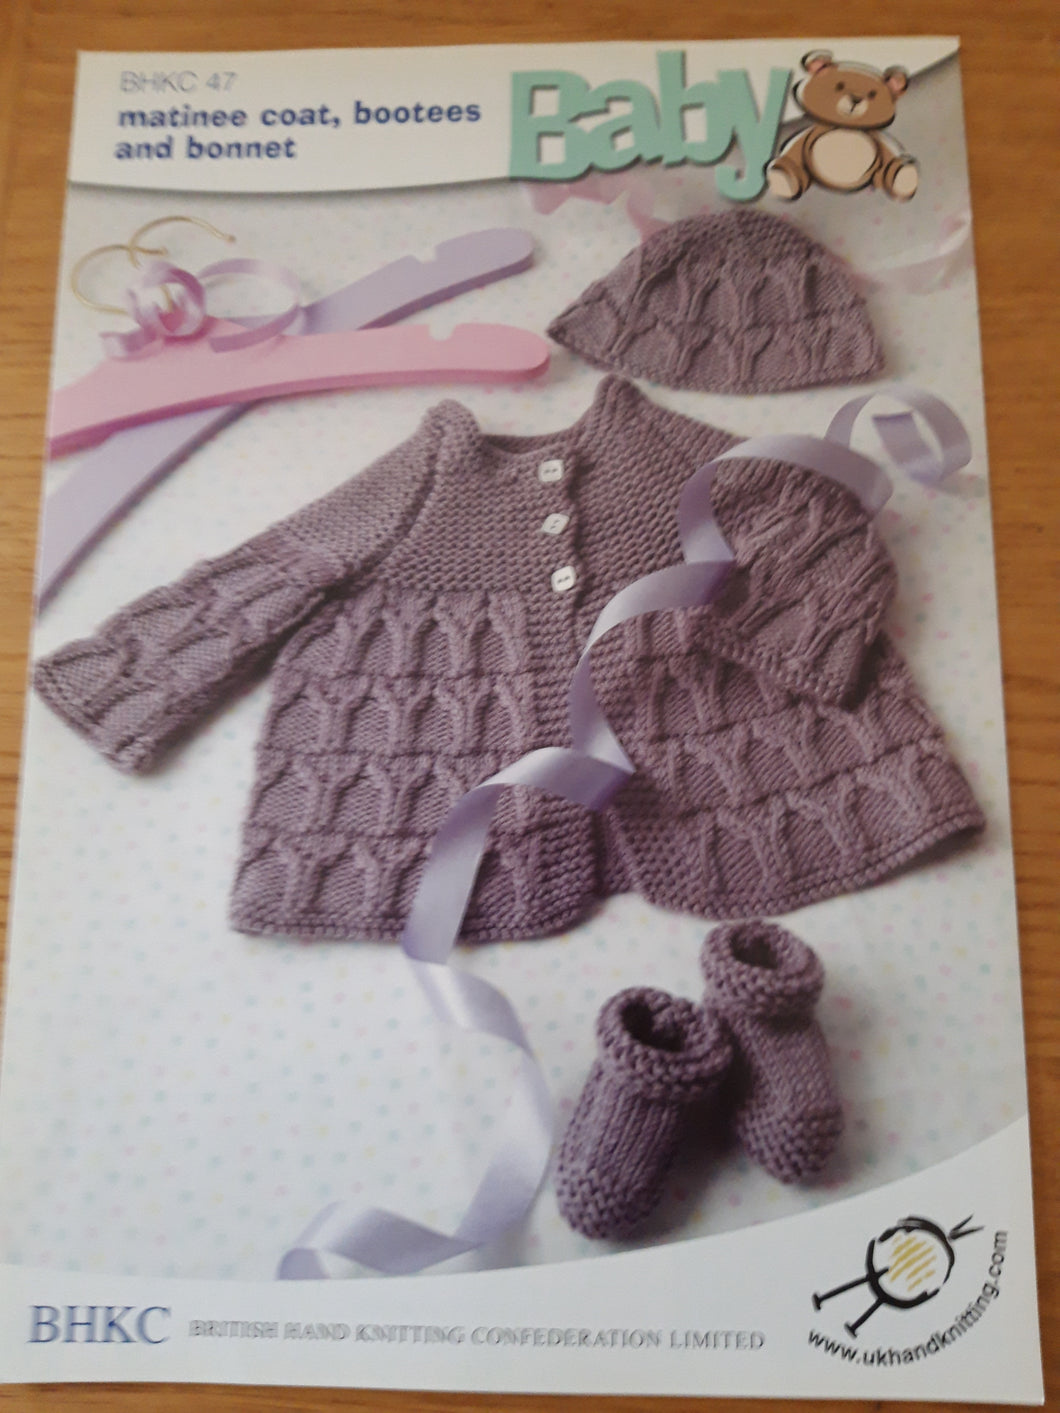 BHKC 47 - Baby 4 ply  - Matinee Coat, Booties and Bonnet - 10